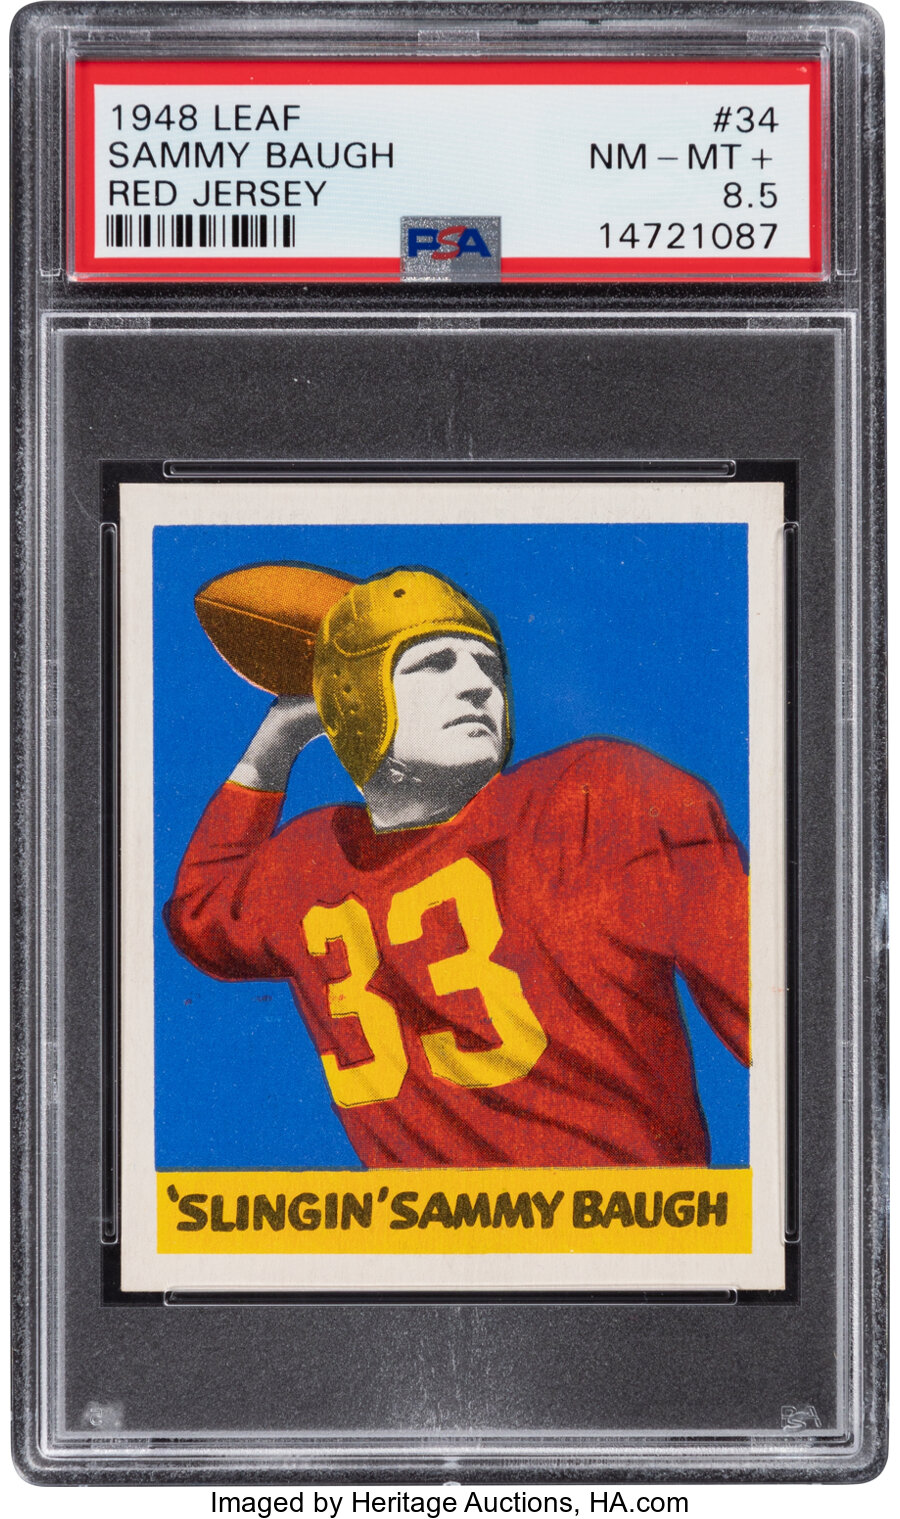 1948 Leaf Sammy Baugh (Red Jersey) #34 PSA NM-MT+ 8.5 - Pop One, None Higher for Red Jersey Variant!